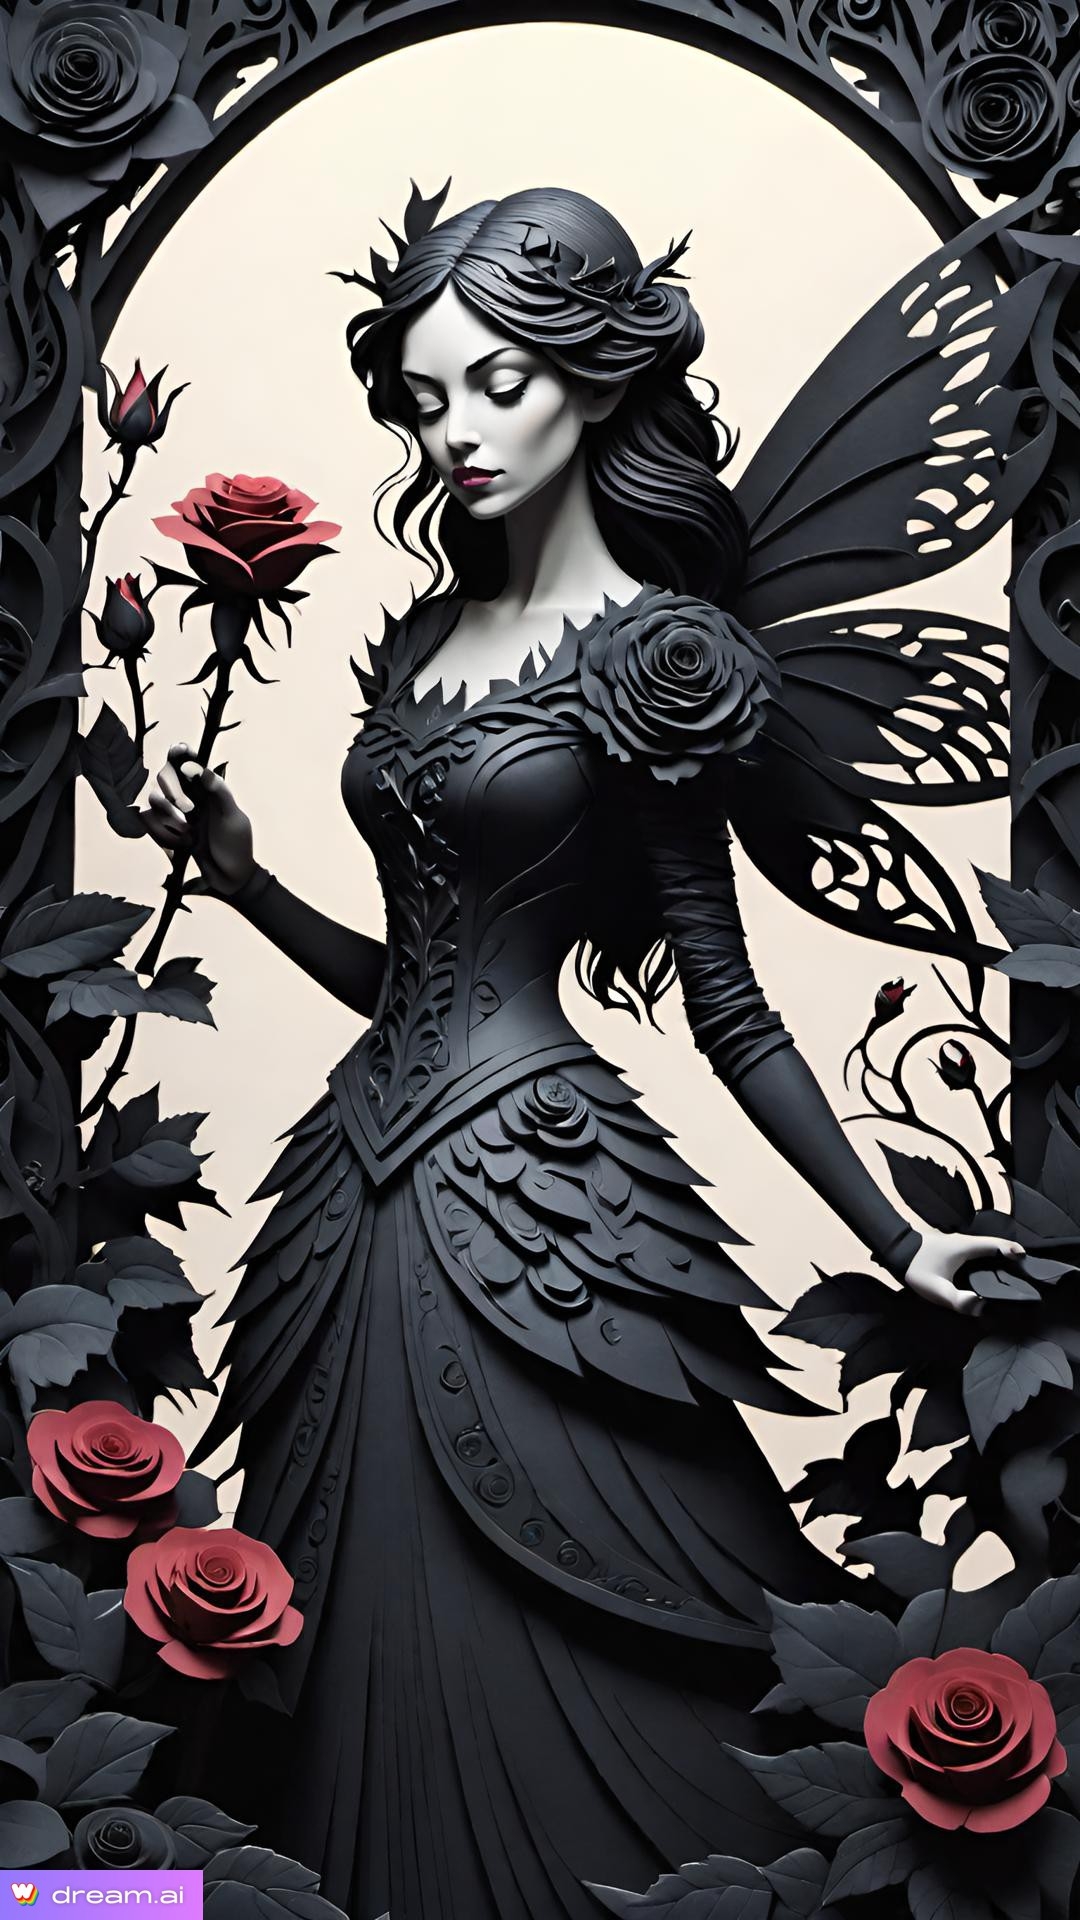 a woman in a black dress holding a rose